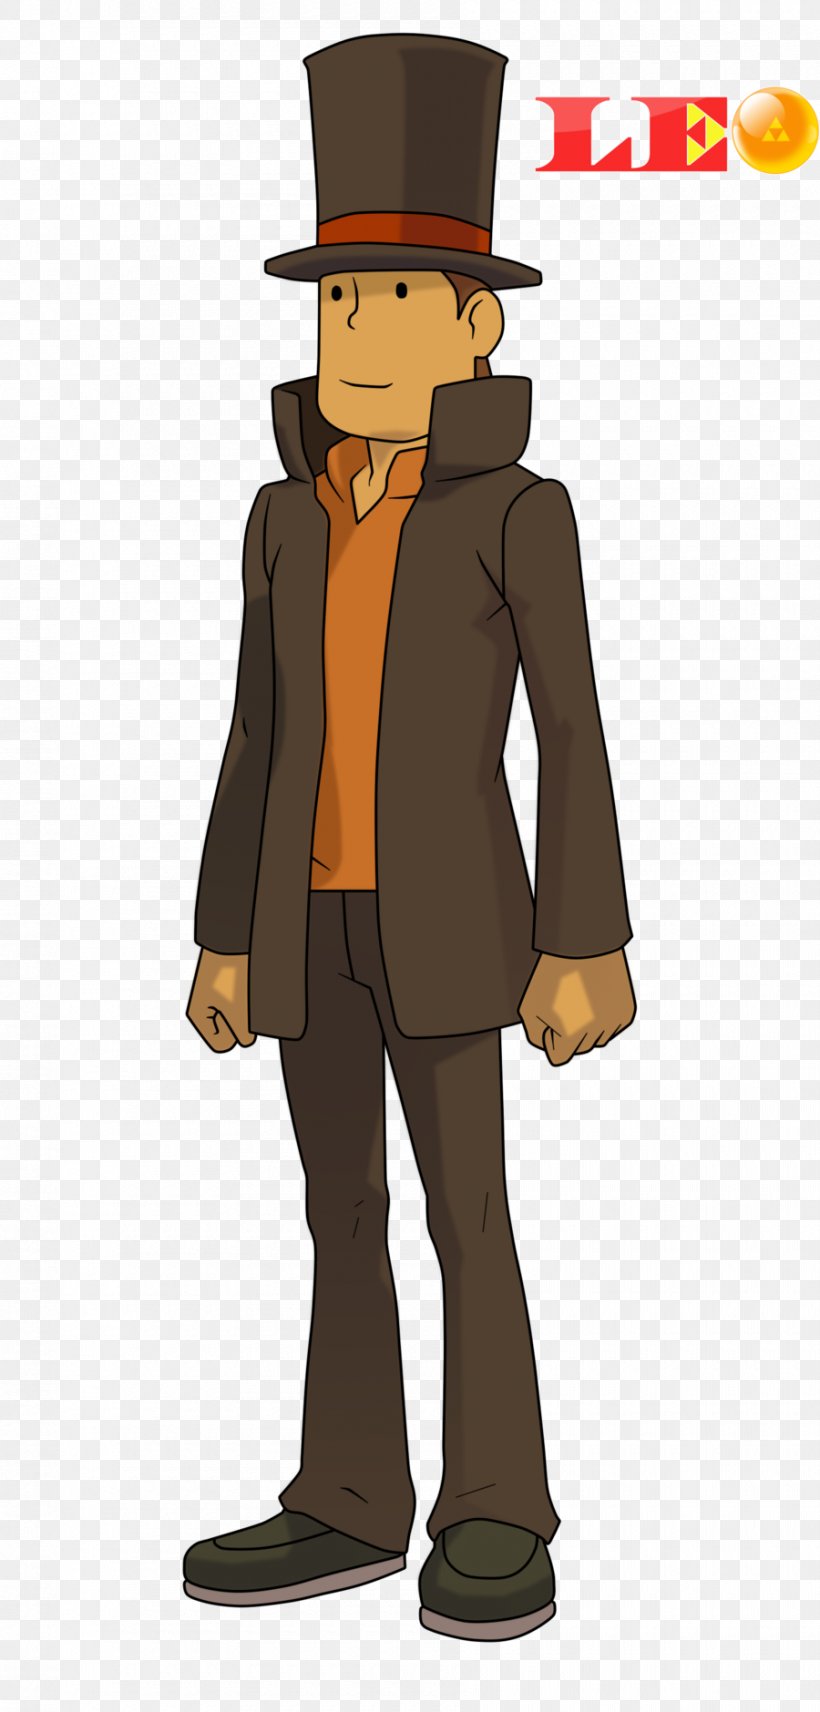 Professor Layton Vs. Phoenix Wright: Ace Attorney Professor Layton And The Curious Village Professor Layton And The Miracle Mask Professor Layton And The Azran Legacies Professor Hershel Layton, PNG, 900x1880px, Professor Hershel Layton, Ace Attorney, Cartoon, Fictional Character, Game Download Free